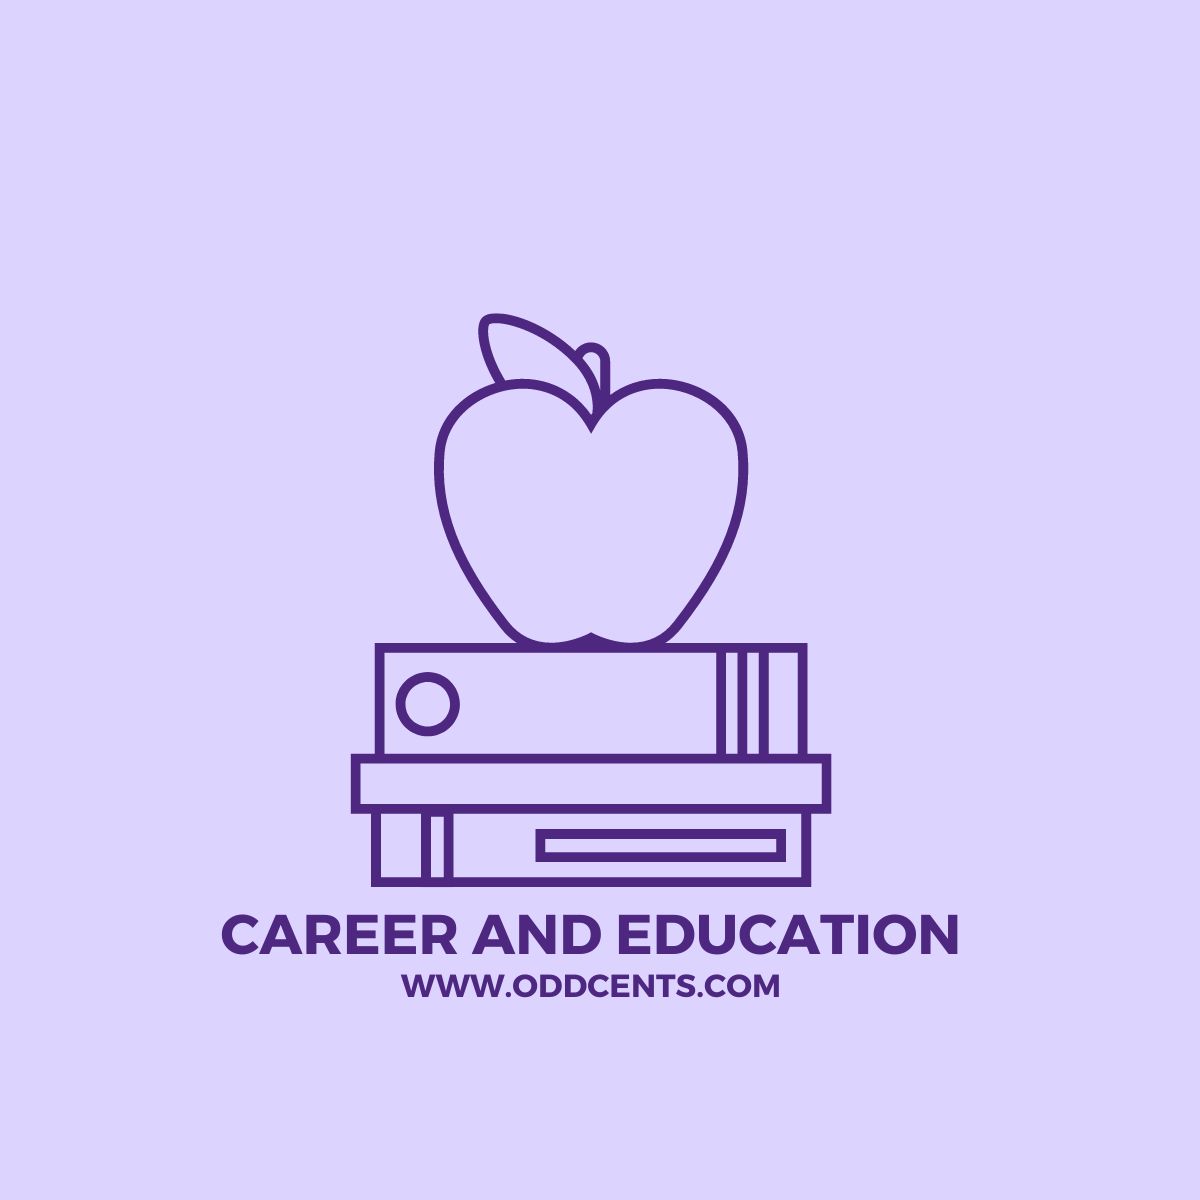 Odd Cents - Career and Education